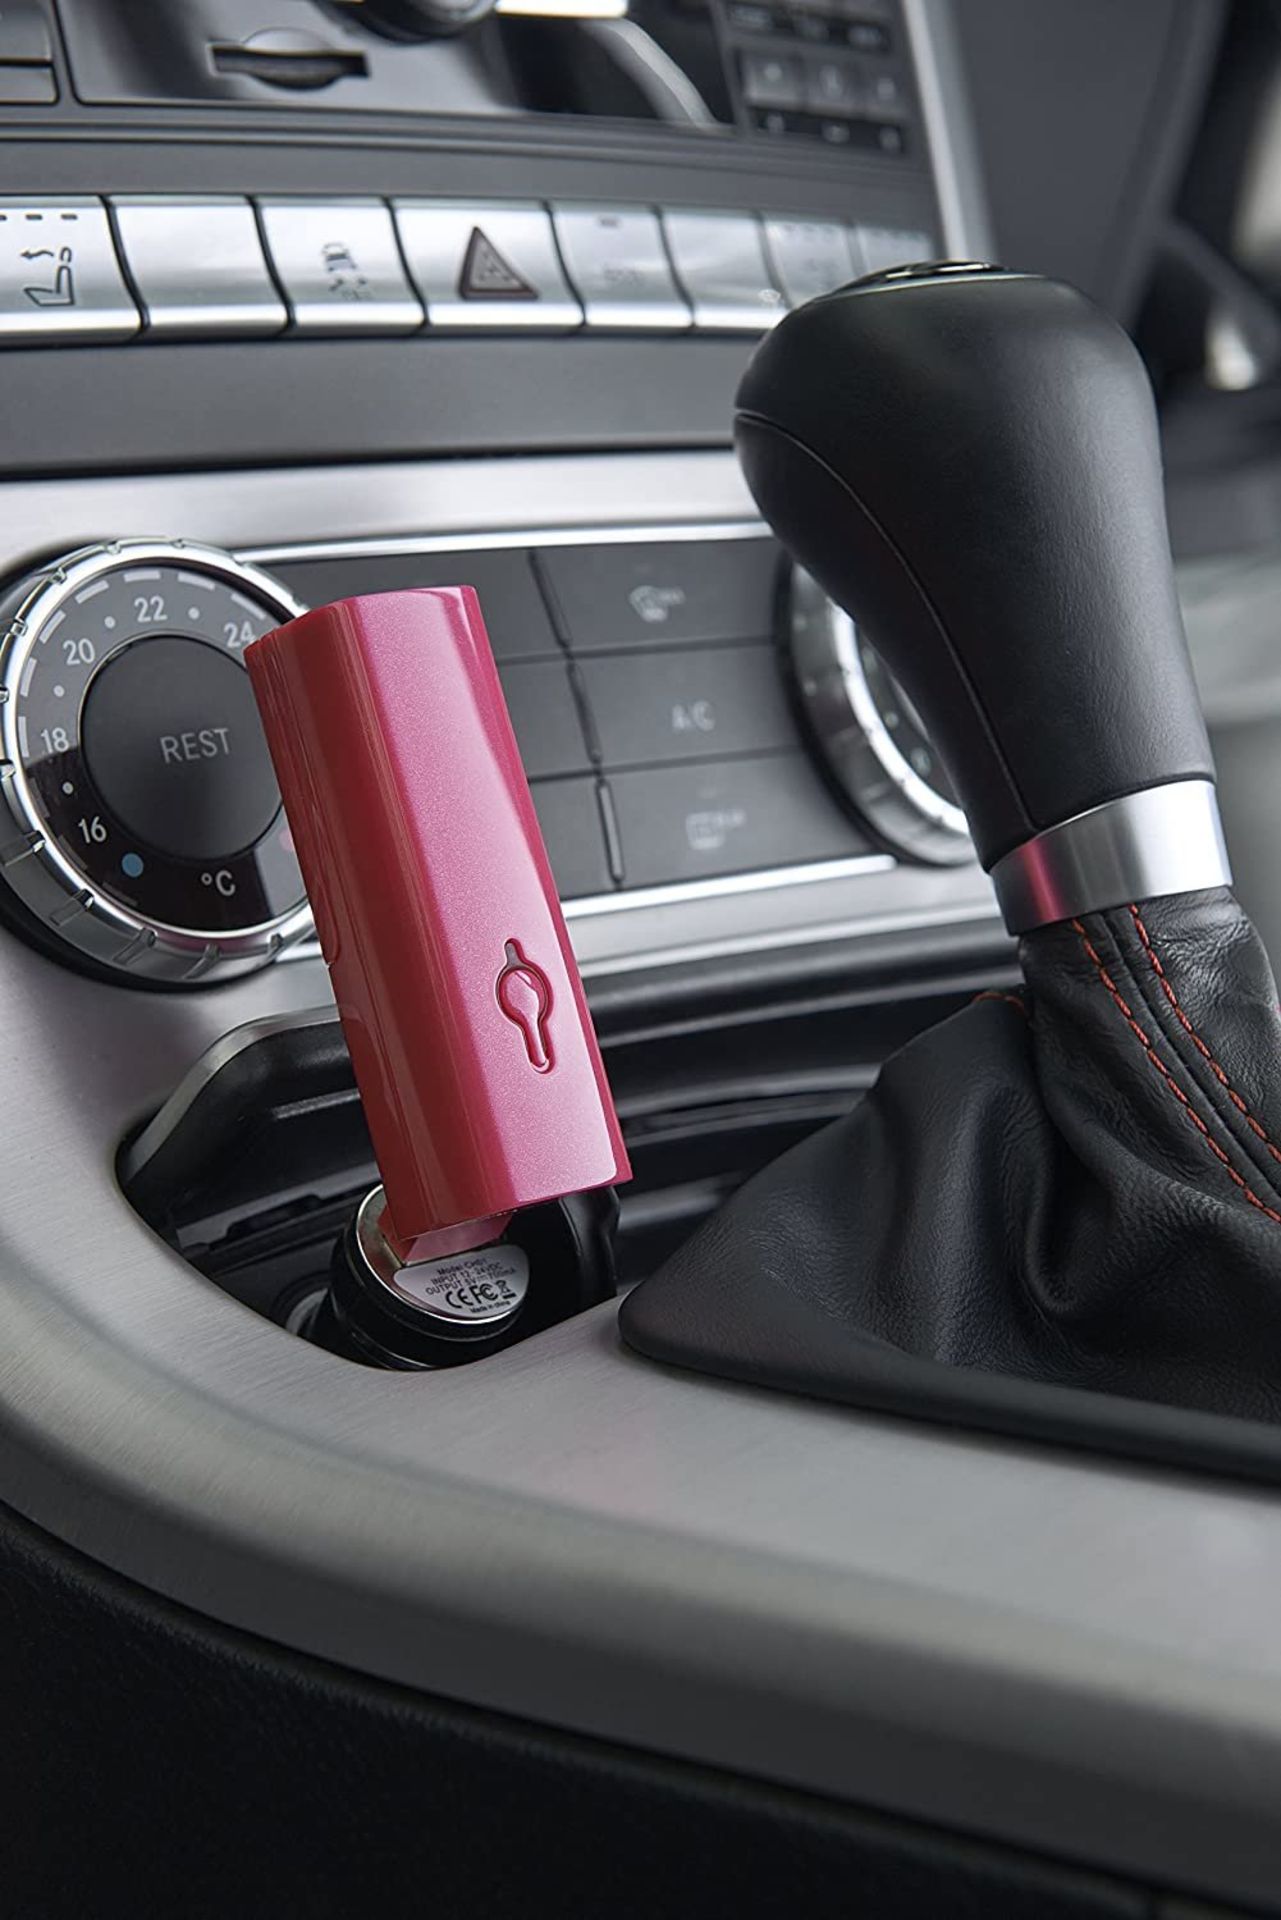 x24 USB Diffuser In Rose Pink - Image 3 of 4